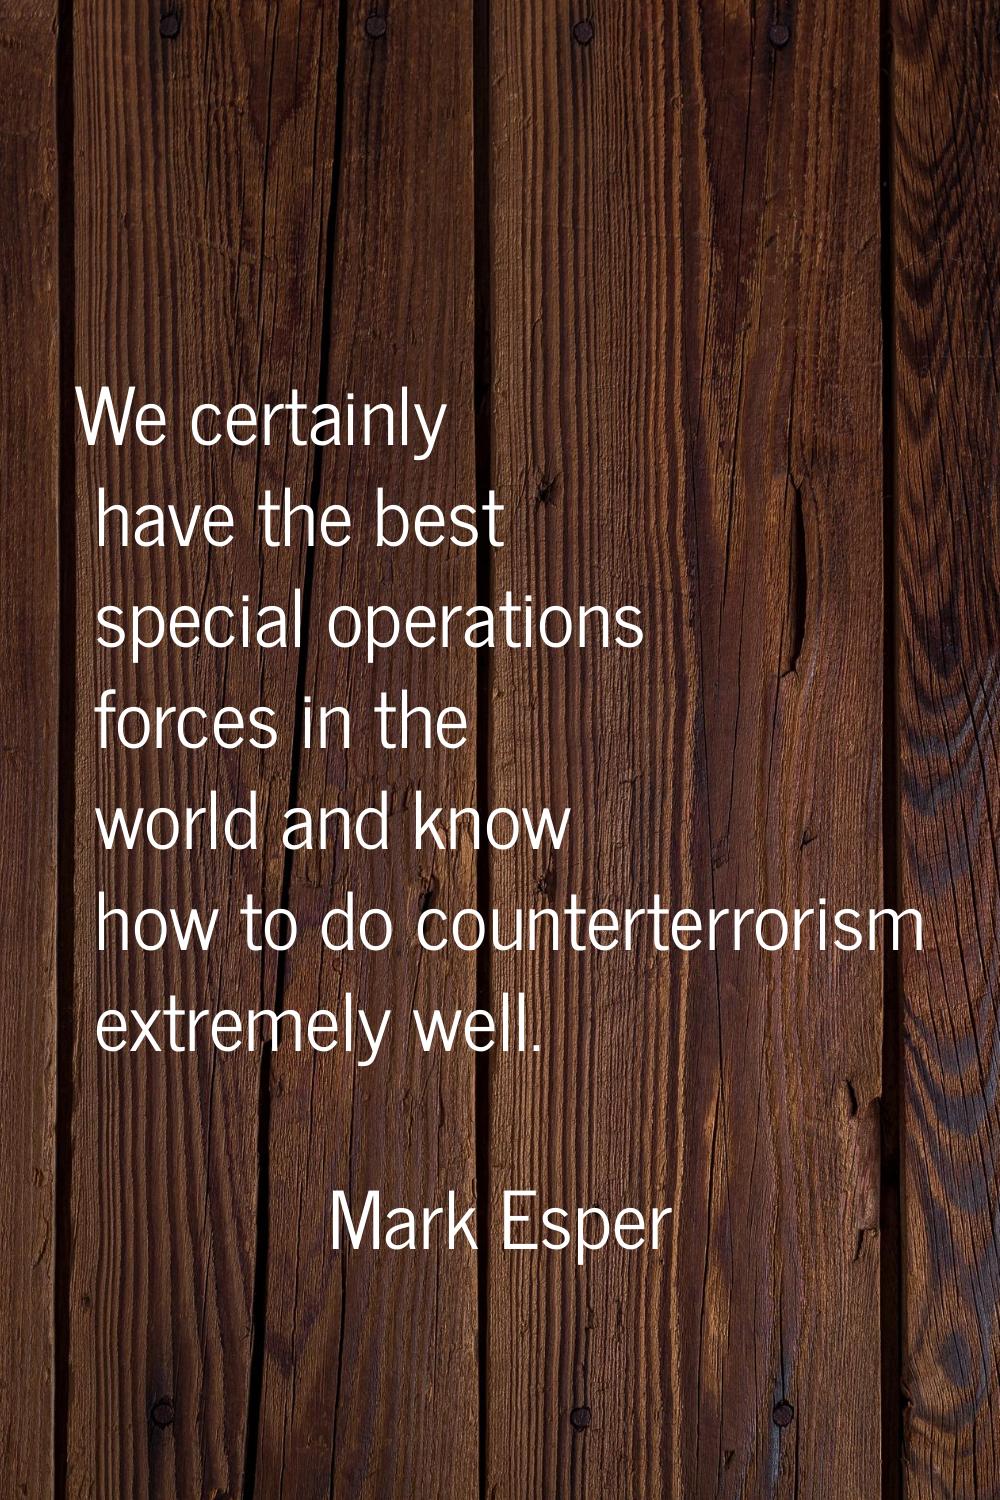 We certainly have the best special operations forces in the world and know how to do counterterrori